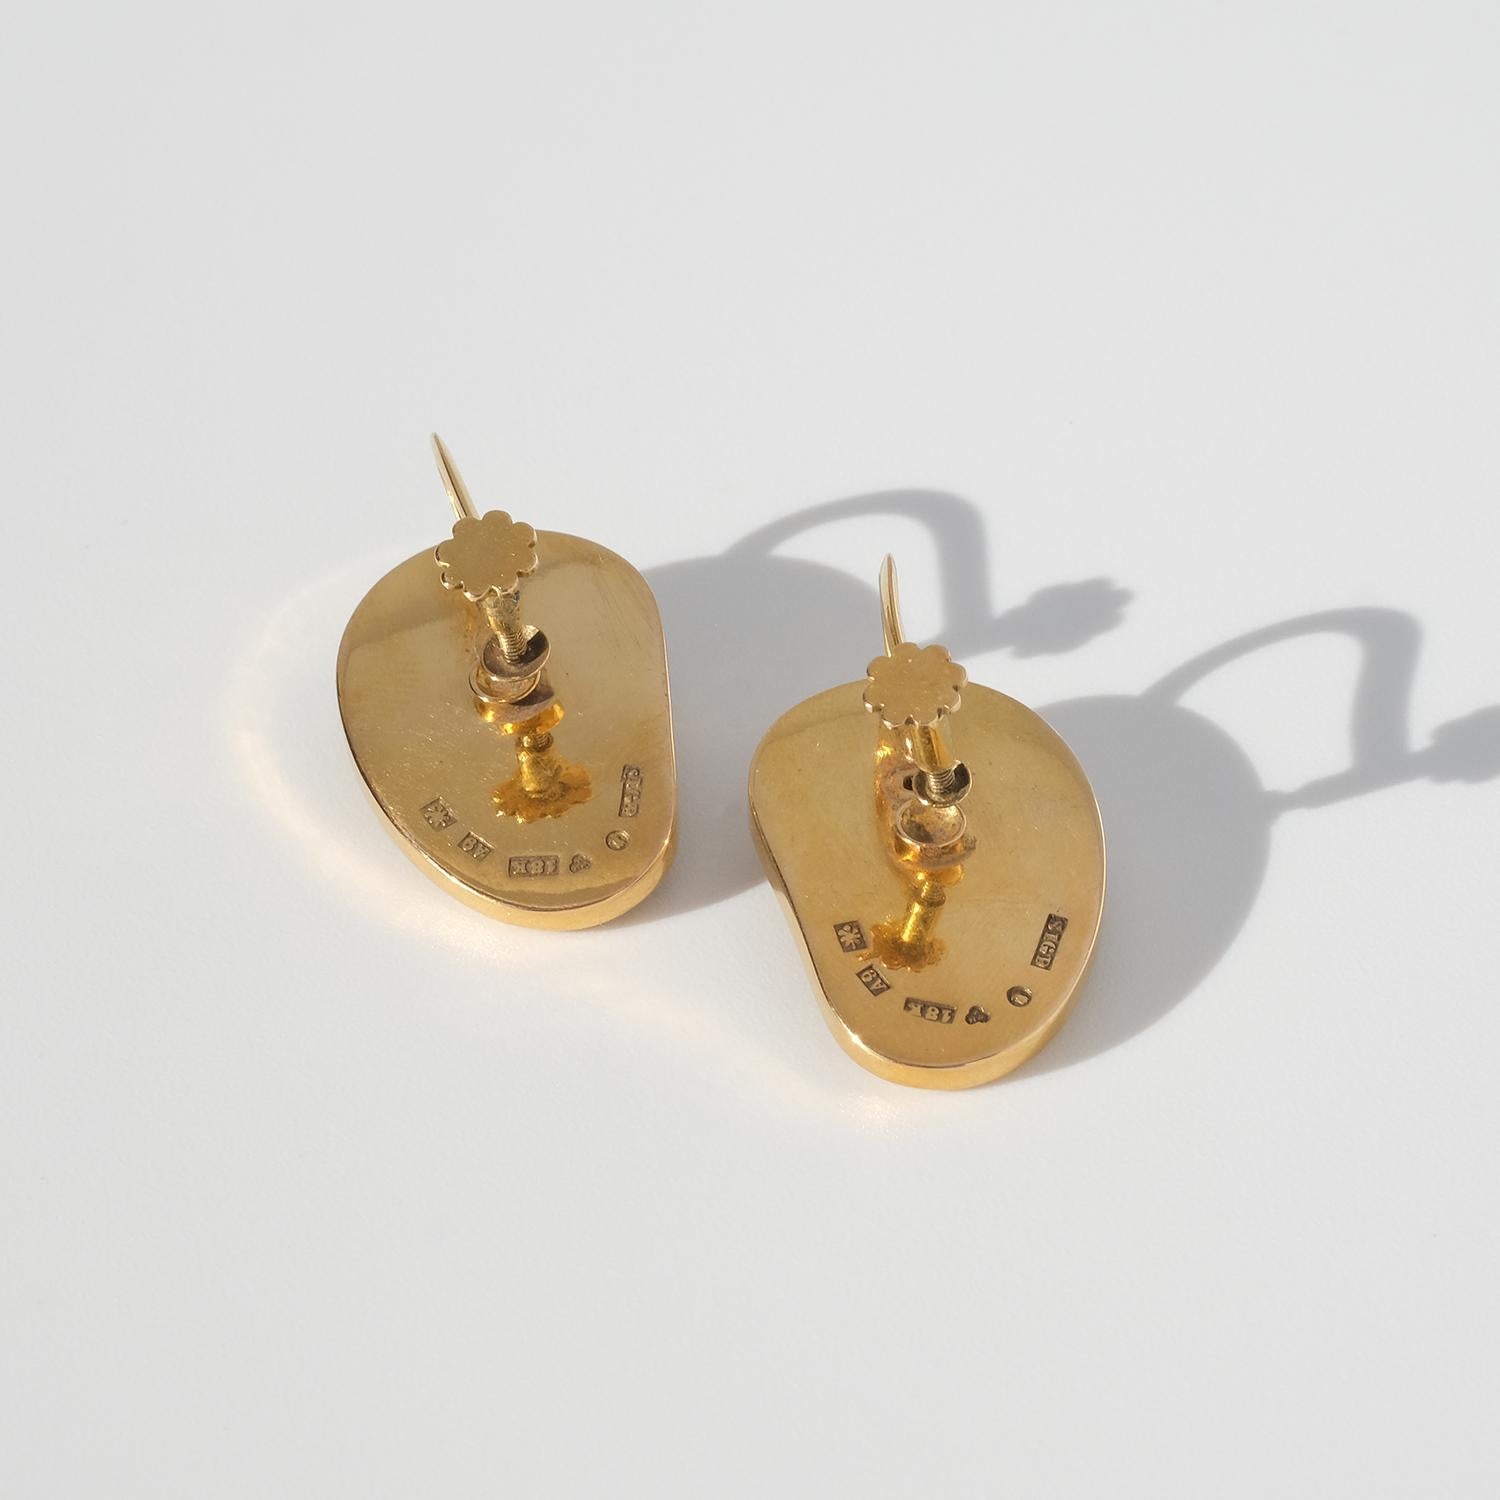 Pair of Swedish Earrings Made by Sigurd Persson, Made 1951 For Sale 4